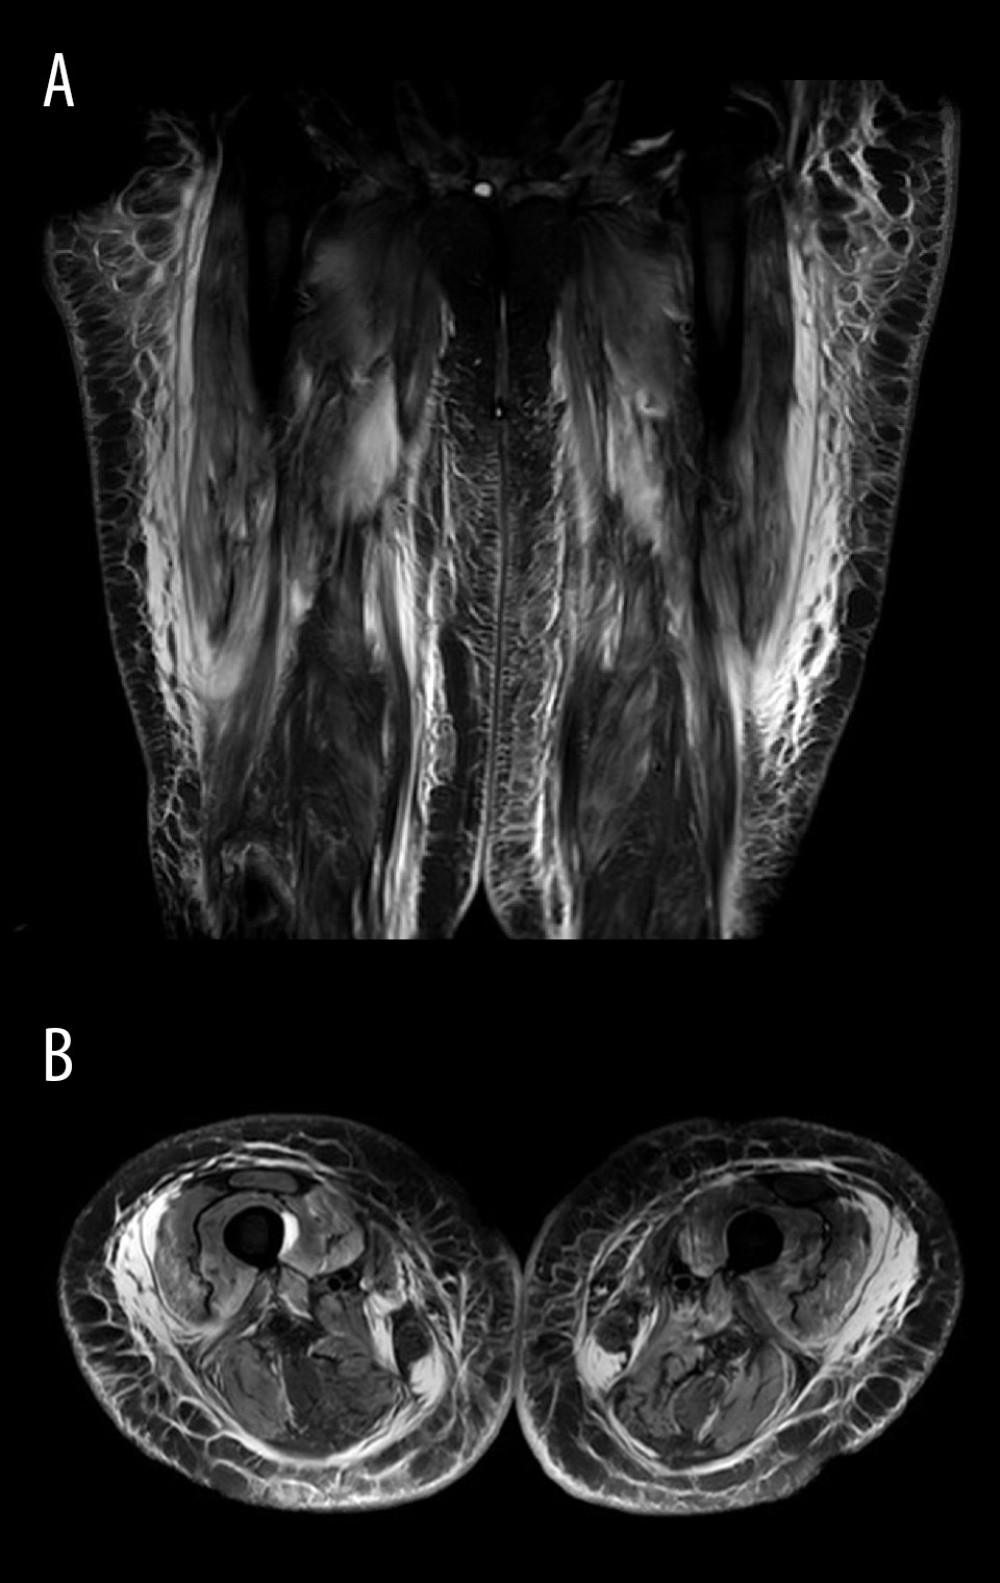 (A, B) MRI bilateral quadriceps showing diffusely increased T2 signal throughout the visualized musculature, with fluid present along the deep rectus femoris, consistent with diffuse bilateral thigh myositis and extensive subcutaneous edema without organized fluid collection.